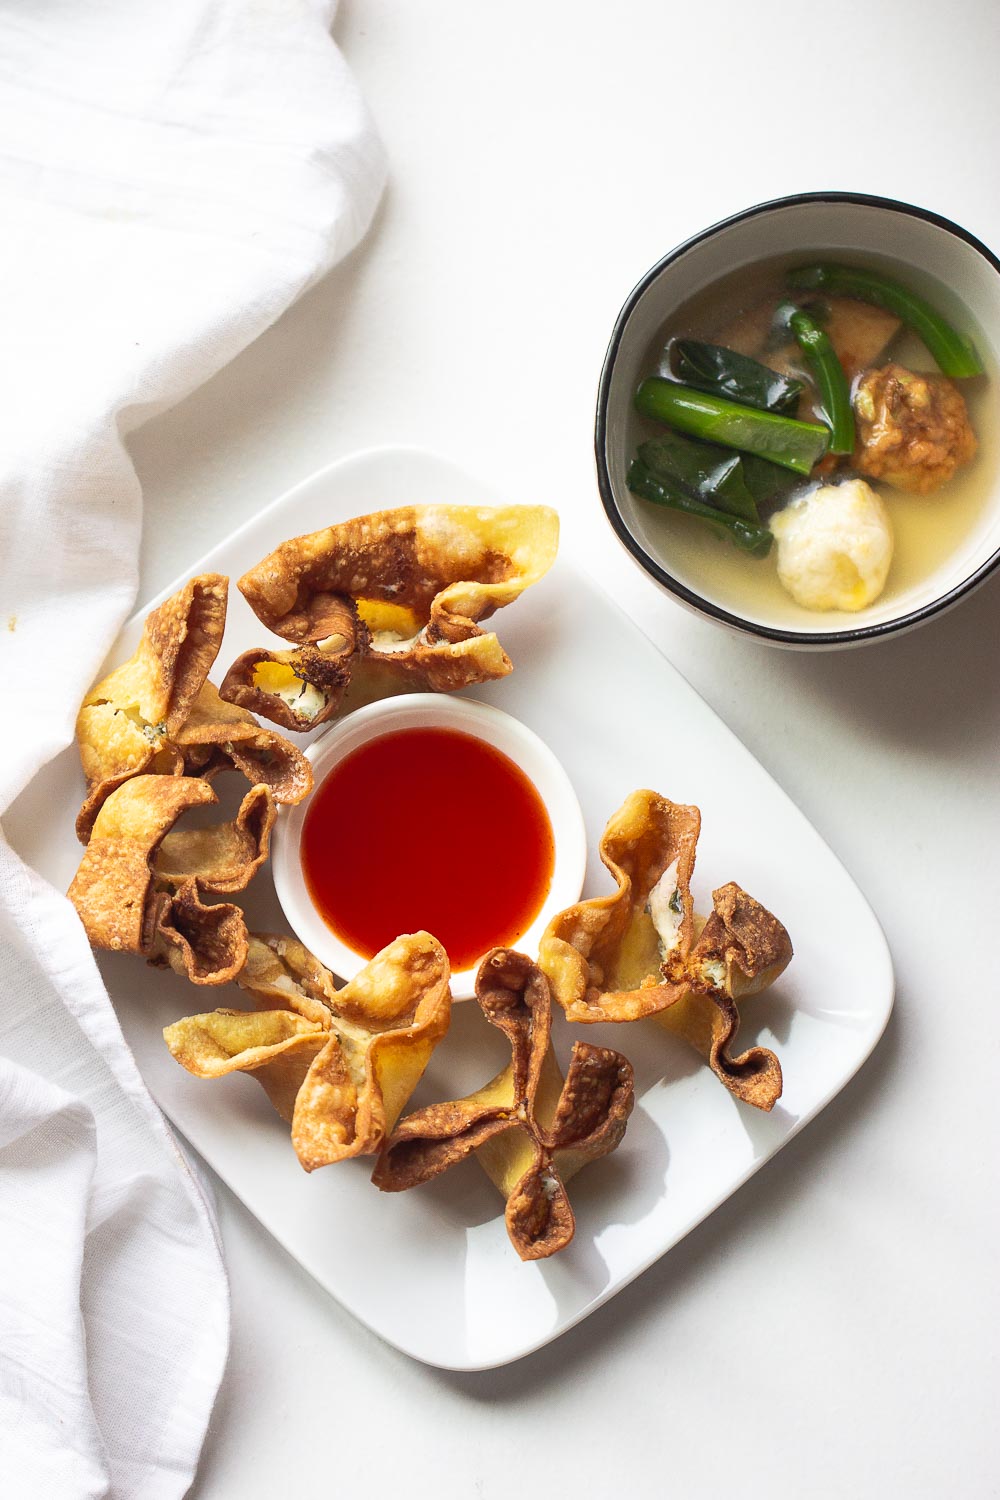 These creamy cream cheese and crab rangoons are so easy to make at home. A fake-out take-out favorite and perfect for snacking on game days!